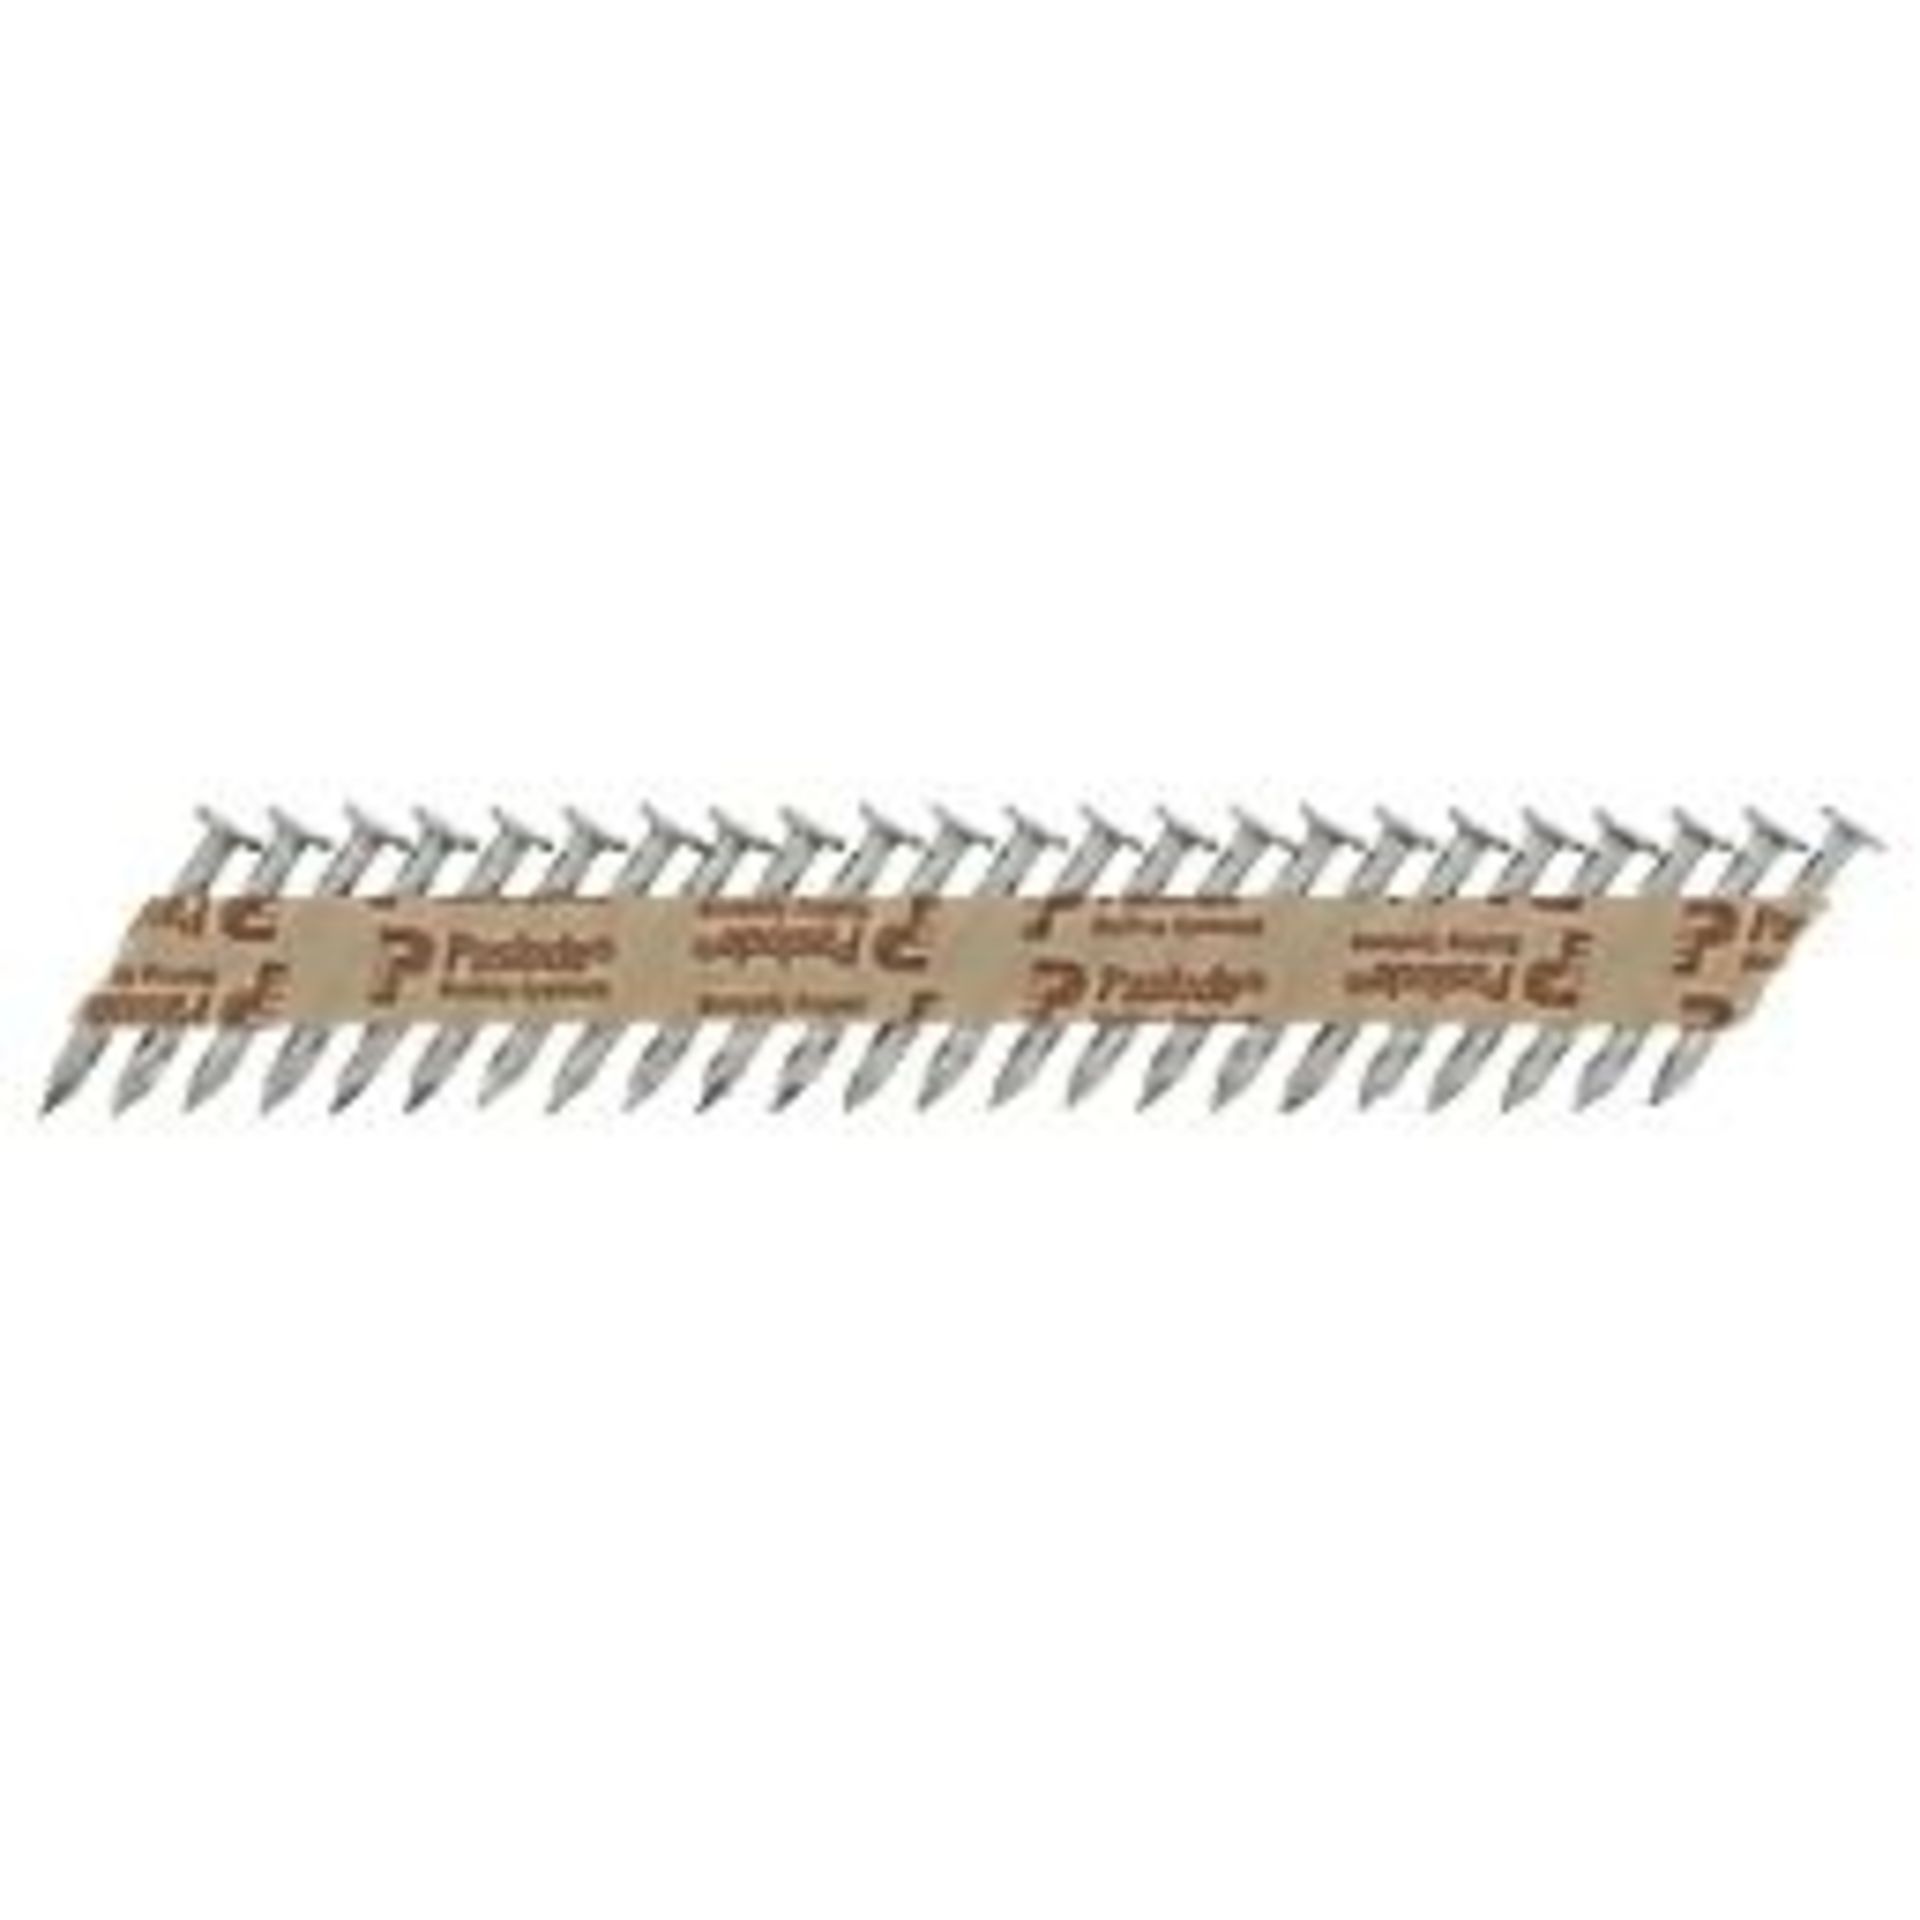 5 x PASLODE GALVANISED PPN35CI COLLATED NAILS 3.4MM X 35MM 2500 PACK. - ER46. RRP £139.99 each.